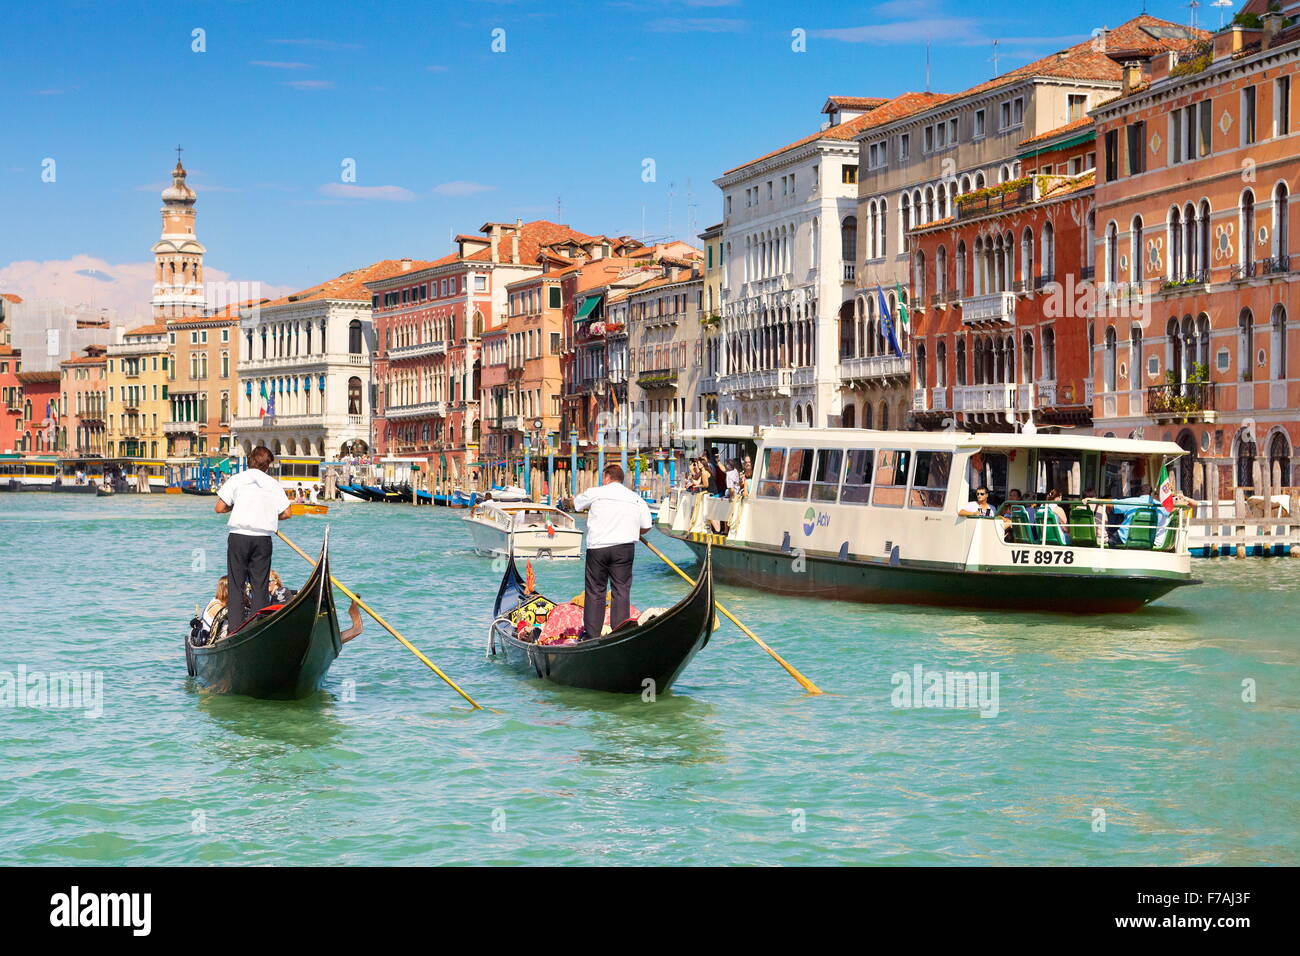 Two venetian gondolas and waterbus on Grand Canal (Canal Grande) - Venice, Italy Stock Photo